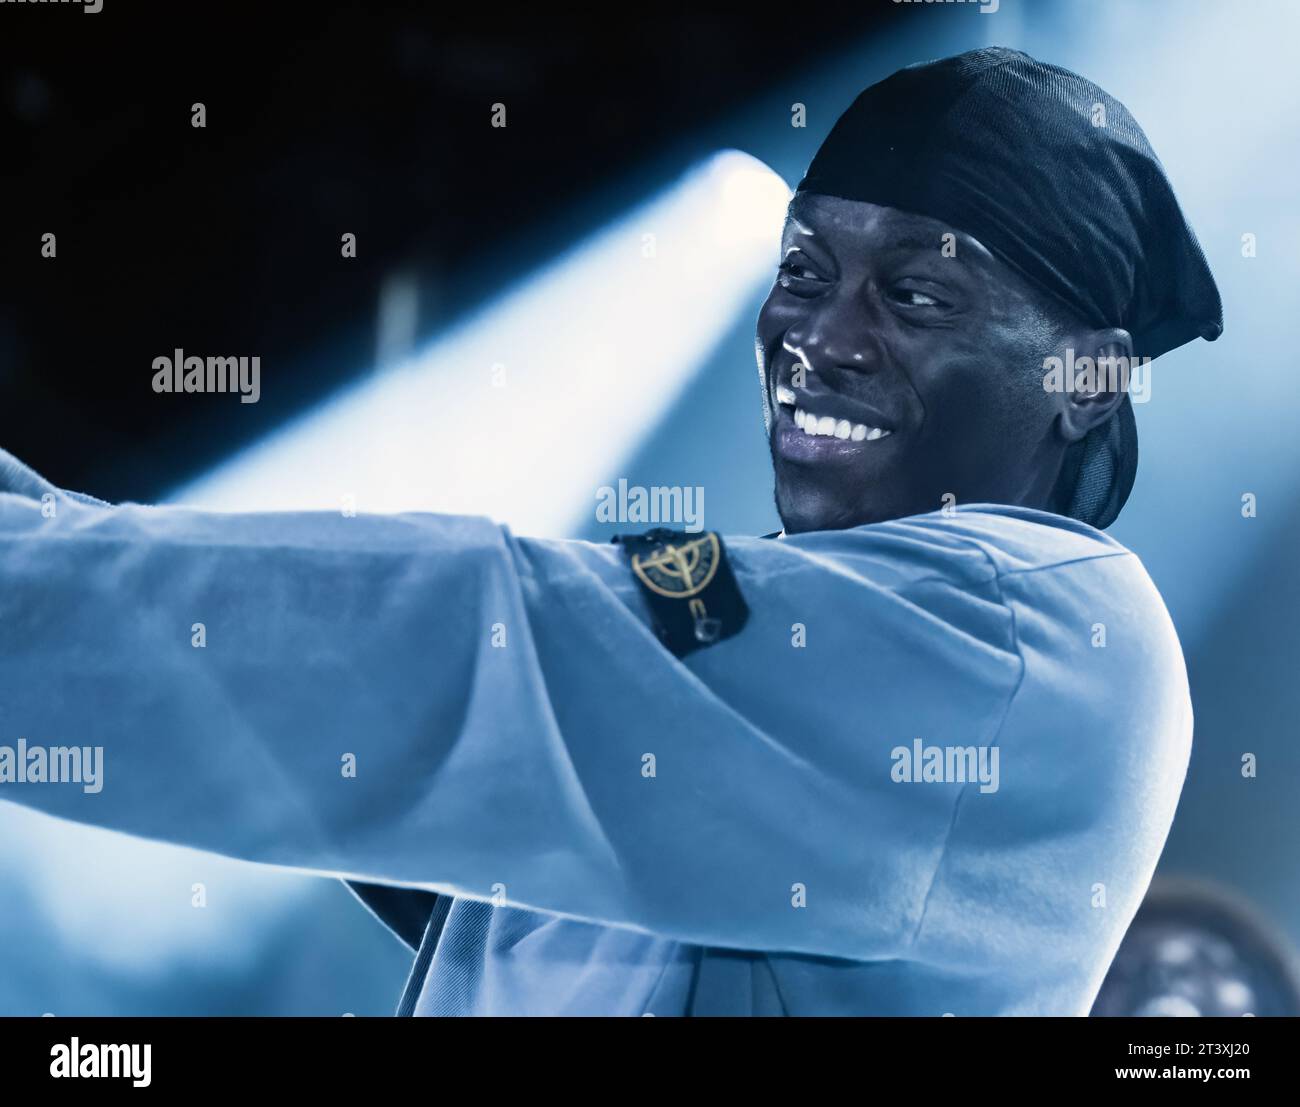 Nottingham, United Kingdom. 26th October 2023, Event: Rock City. “THE STREETS” with Special Guests “HAK BAKER” and “MASTER PEACE”.   PICTURED: MASTER PEACE.  Credit: Mark Dunn/Alamy Live News (To be included where the image is published). Stock Photo